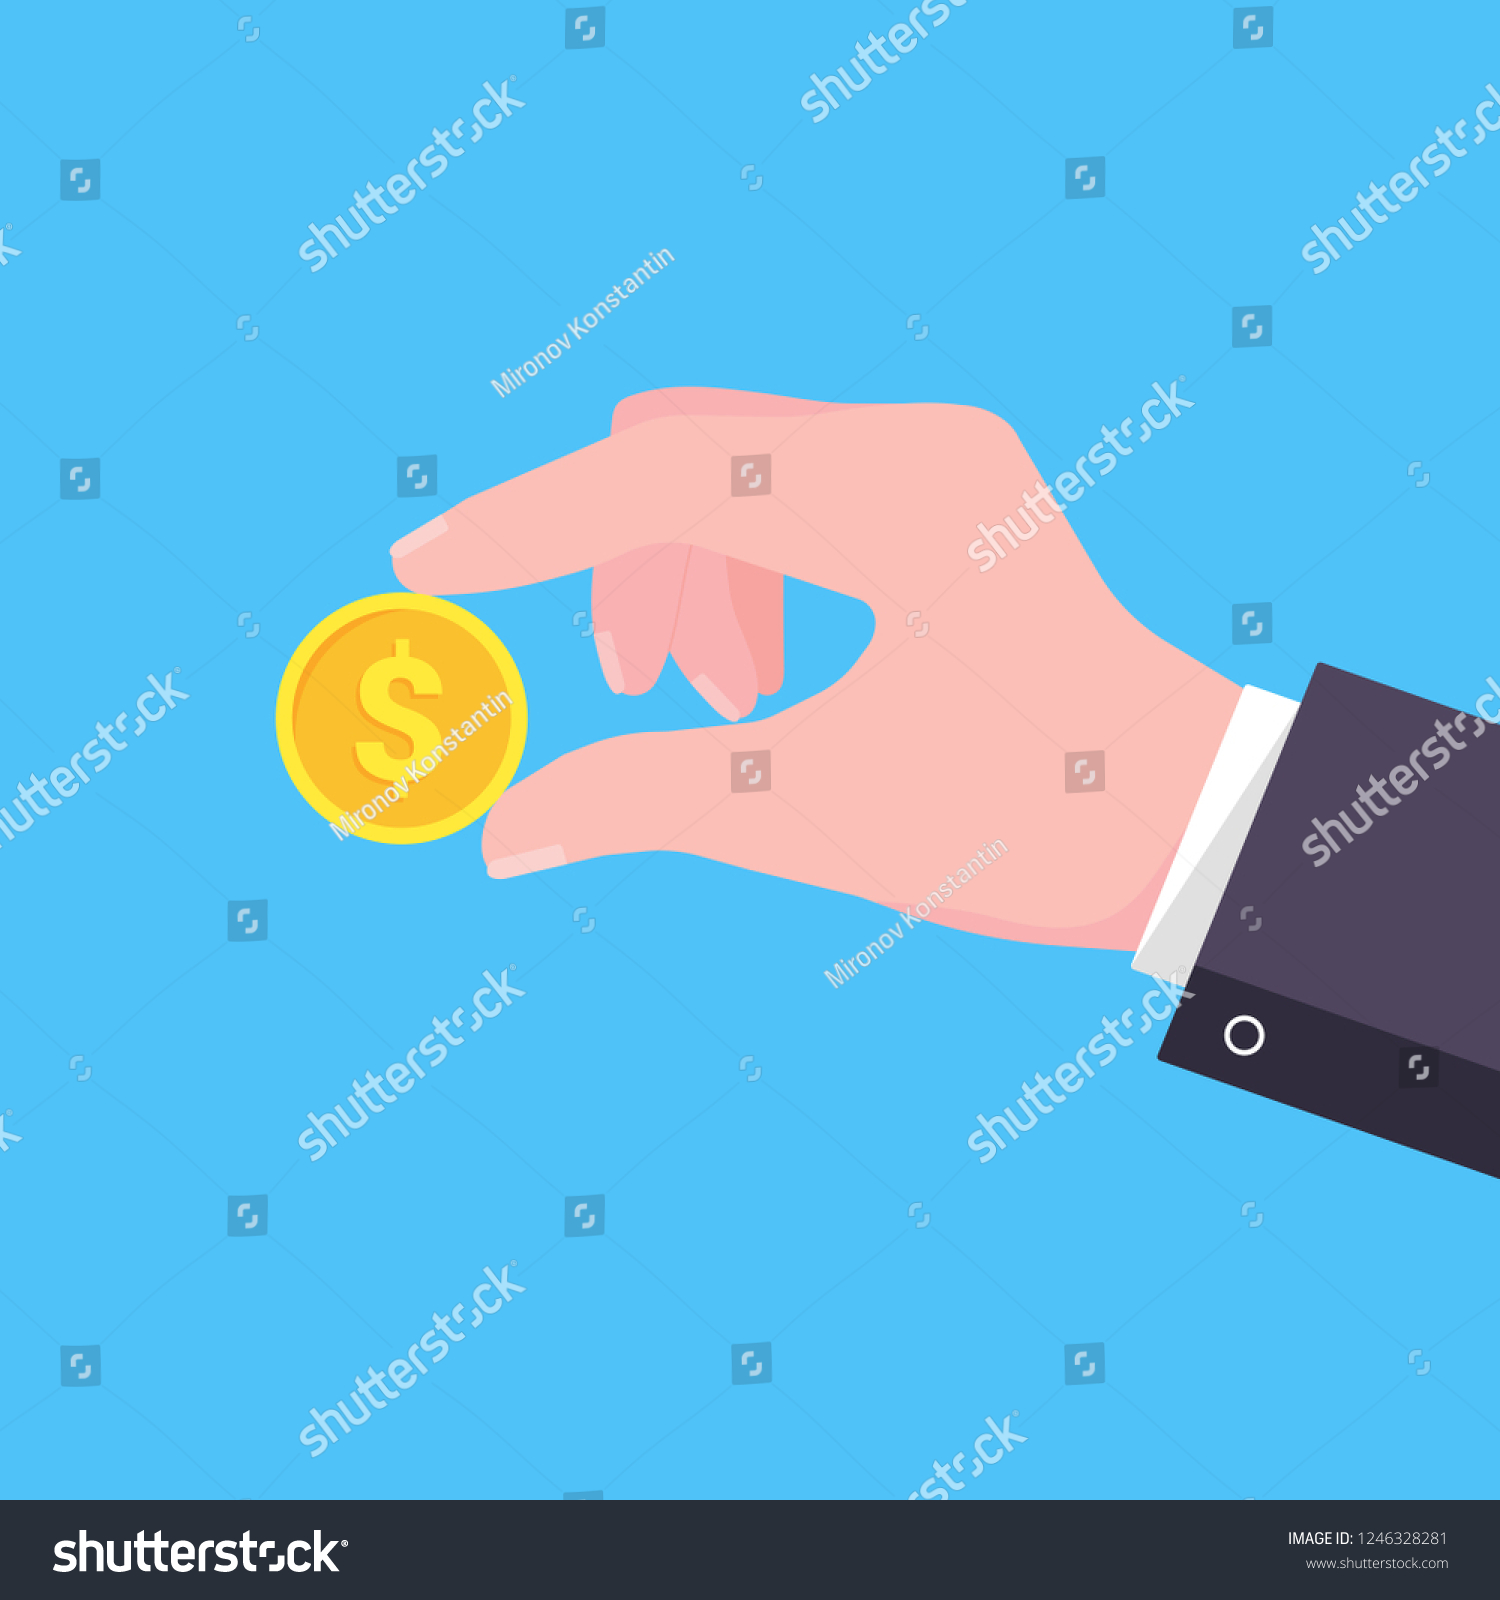 SVG of Hand holds golden coin in two fingers flat style design vector illustration. Donate dollar currency or more. Symbol of donation isolated on light blue background. svg